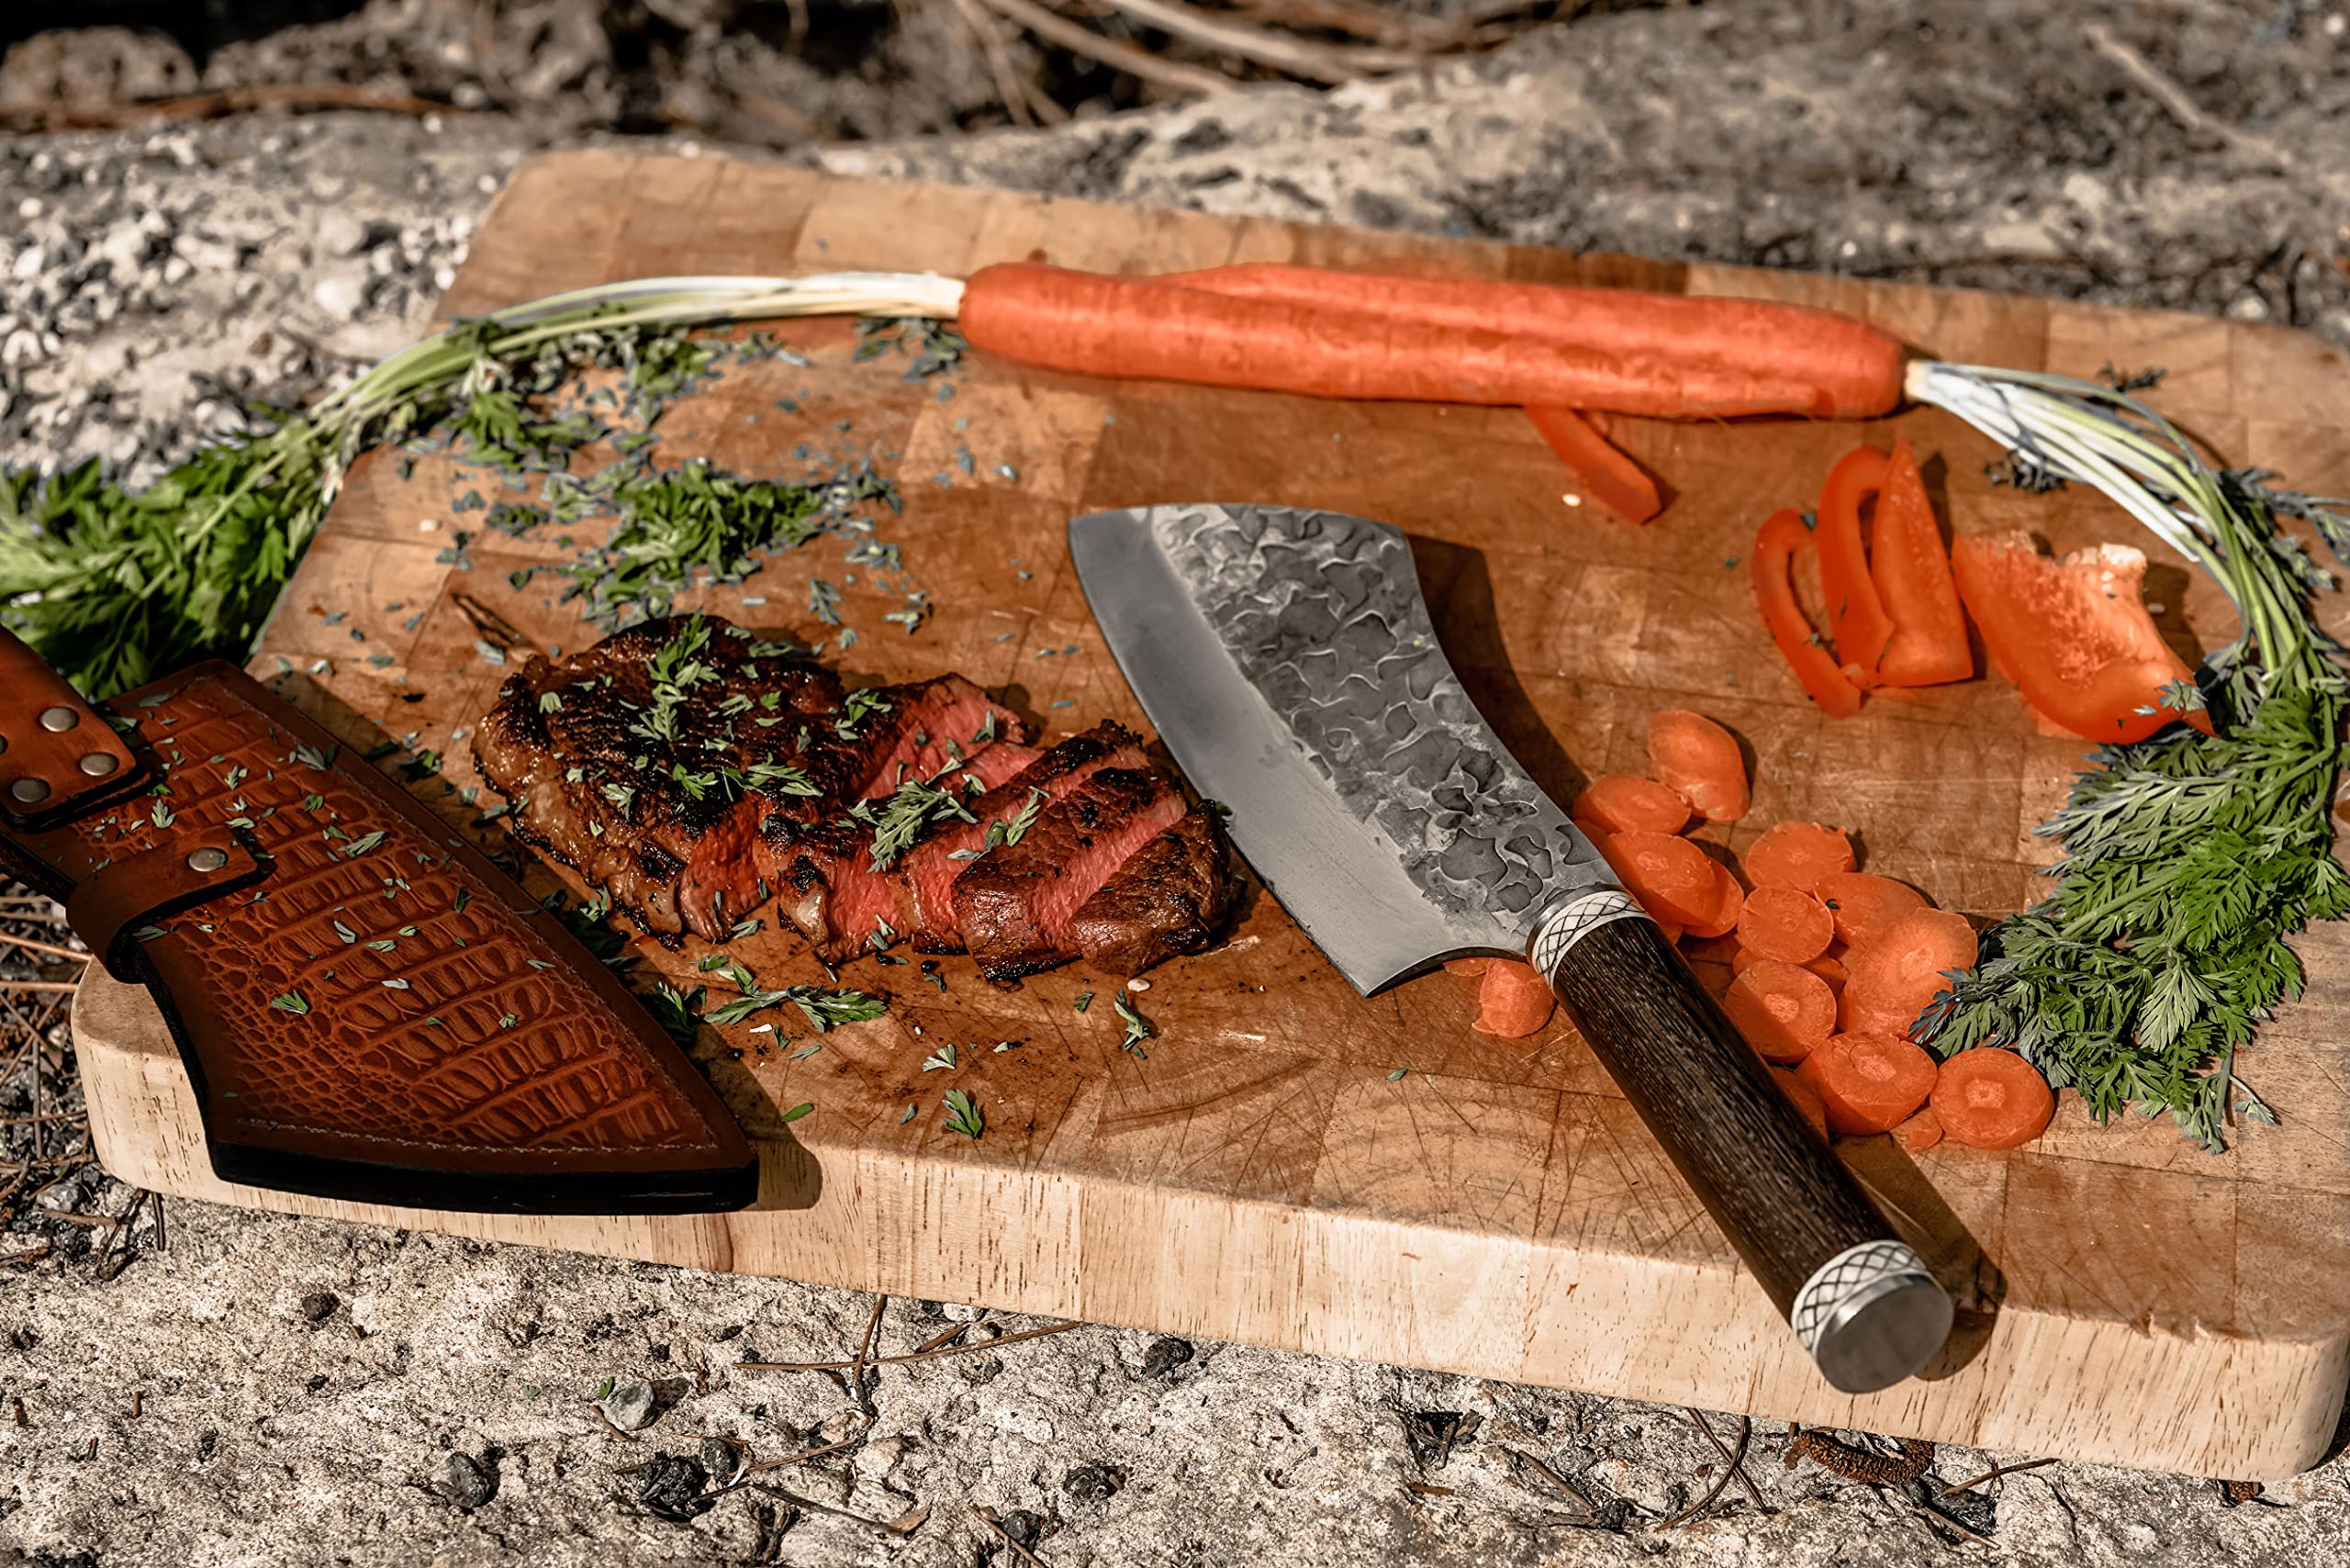 Norse Tradesman Chef & Cleaver Hybrid Knife - 7.5" Razor Sharp Kitchen Knife – Genuine Cowbone Accented Handle with Celtic Knot Engravings – Artisan Forged